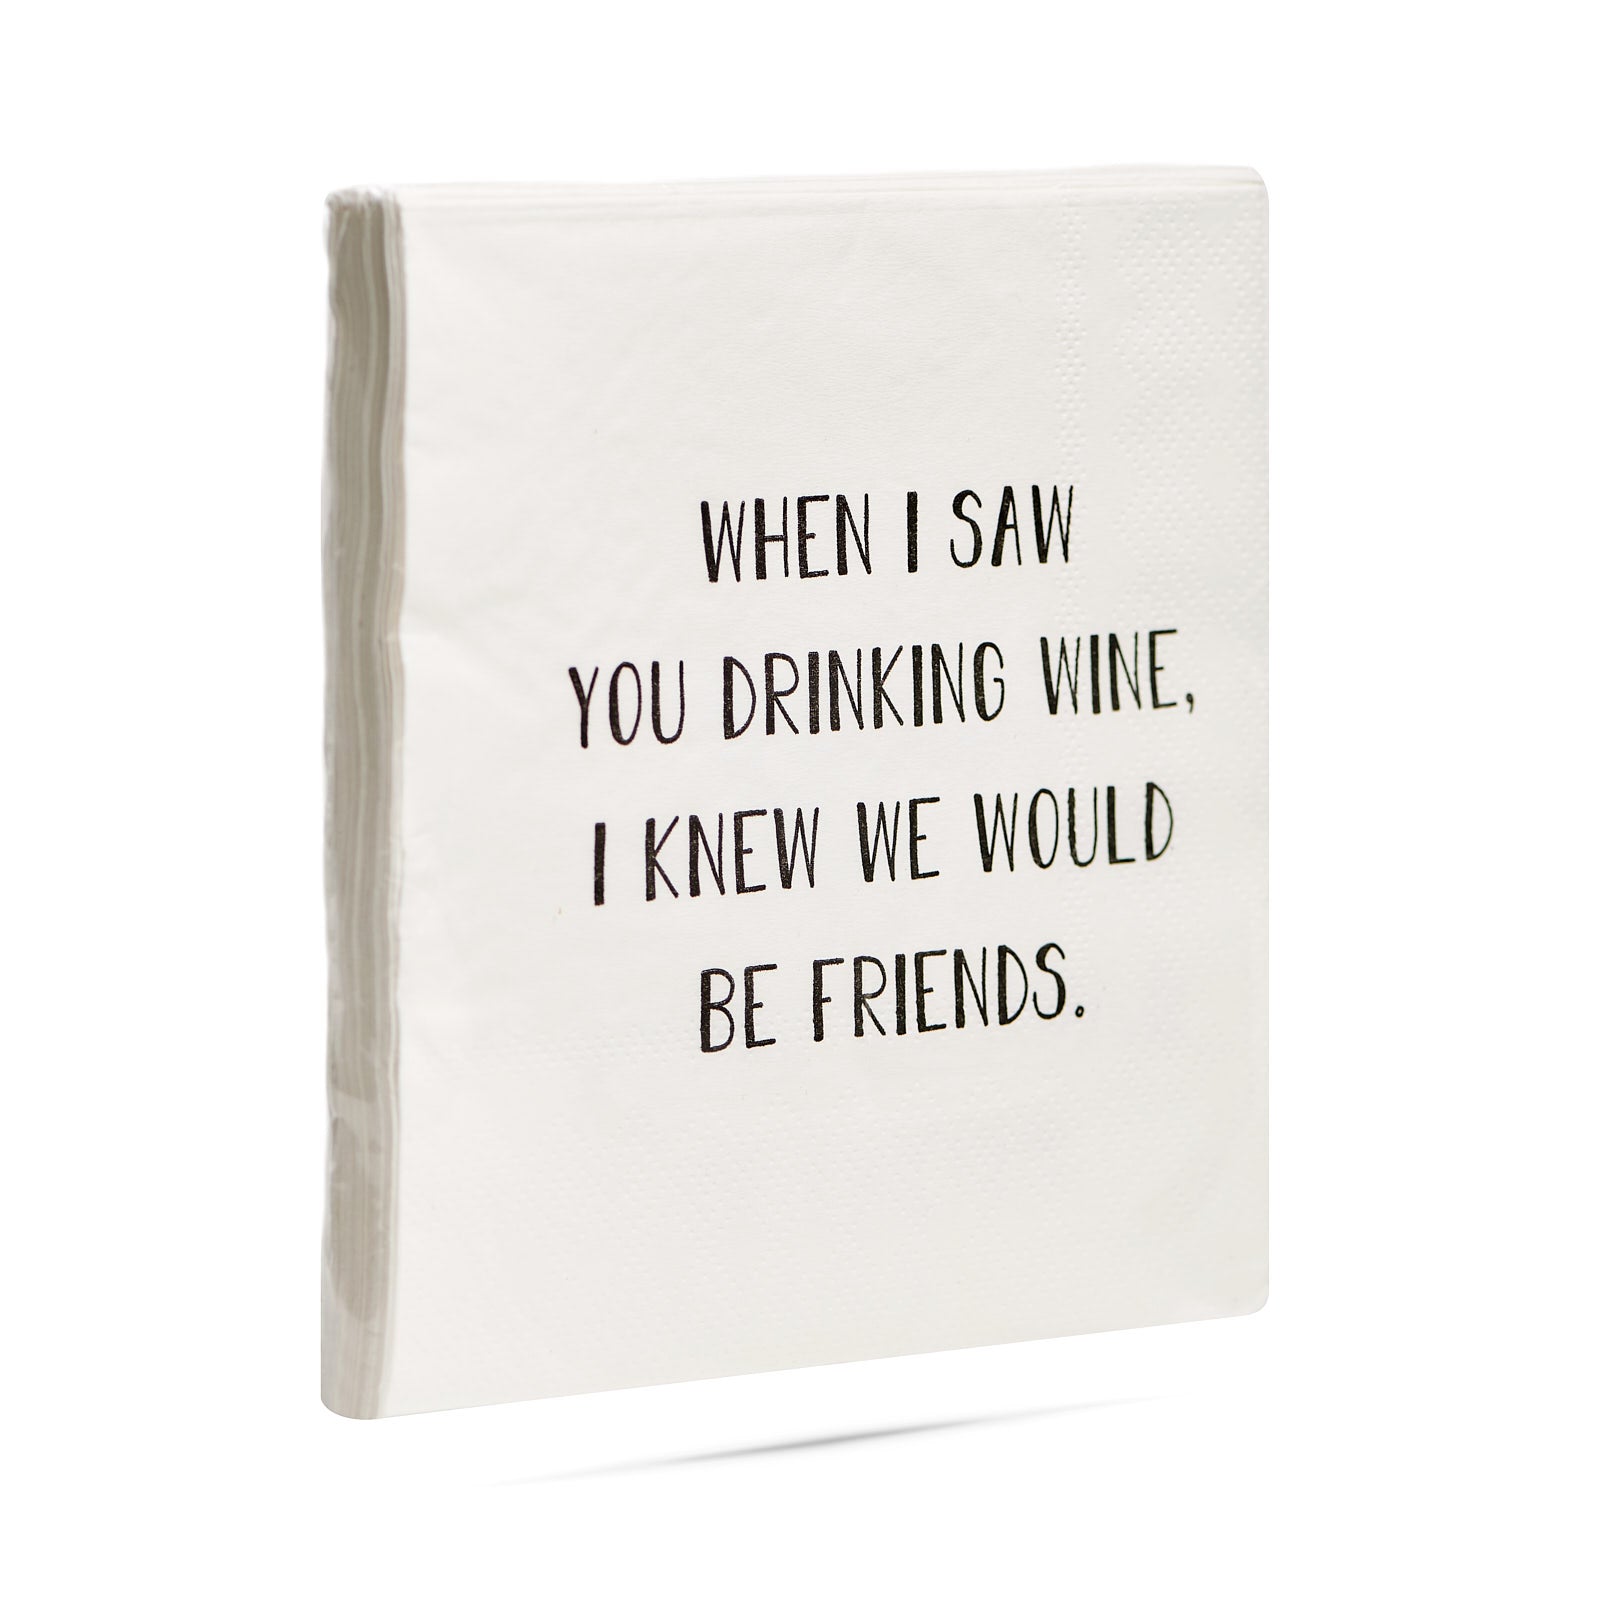 When I saw you drinking wine I knew we would be friends. Cocktail Napkins